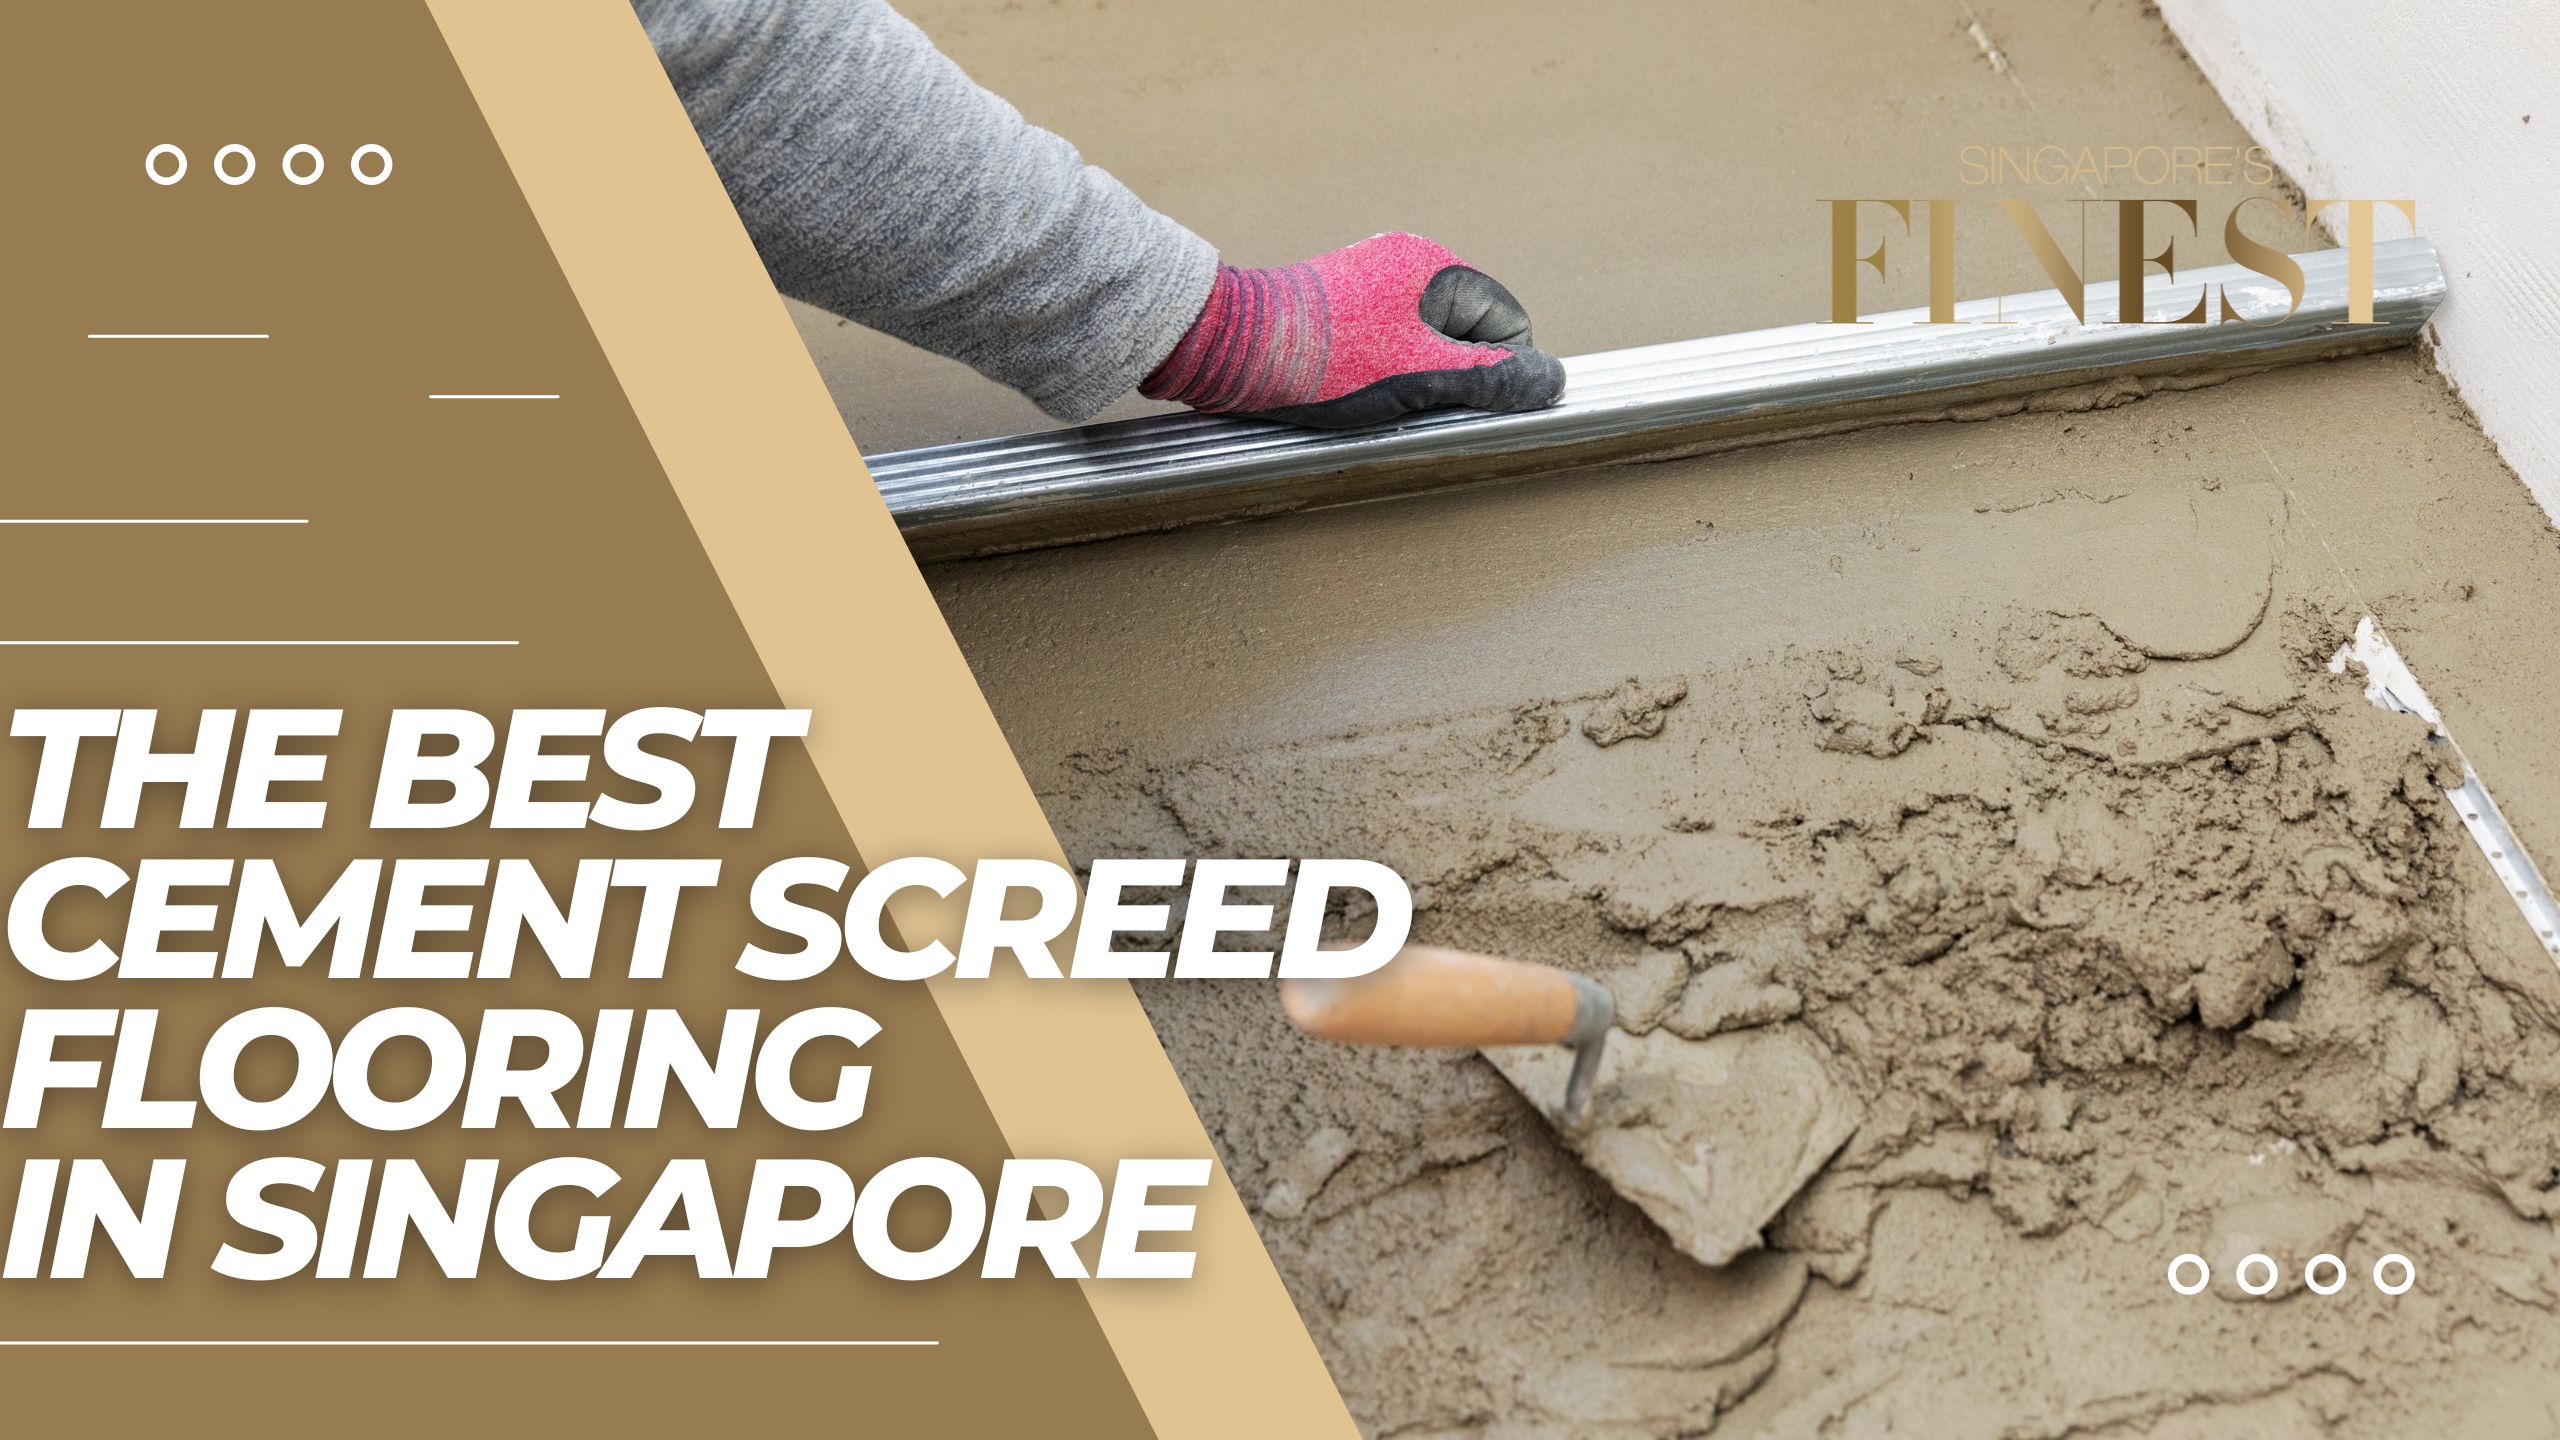 The Finest Cement Screed Flooring in Singapore